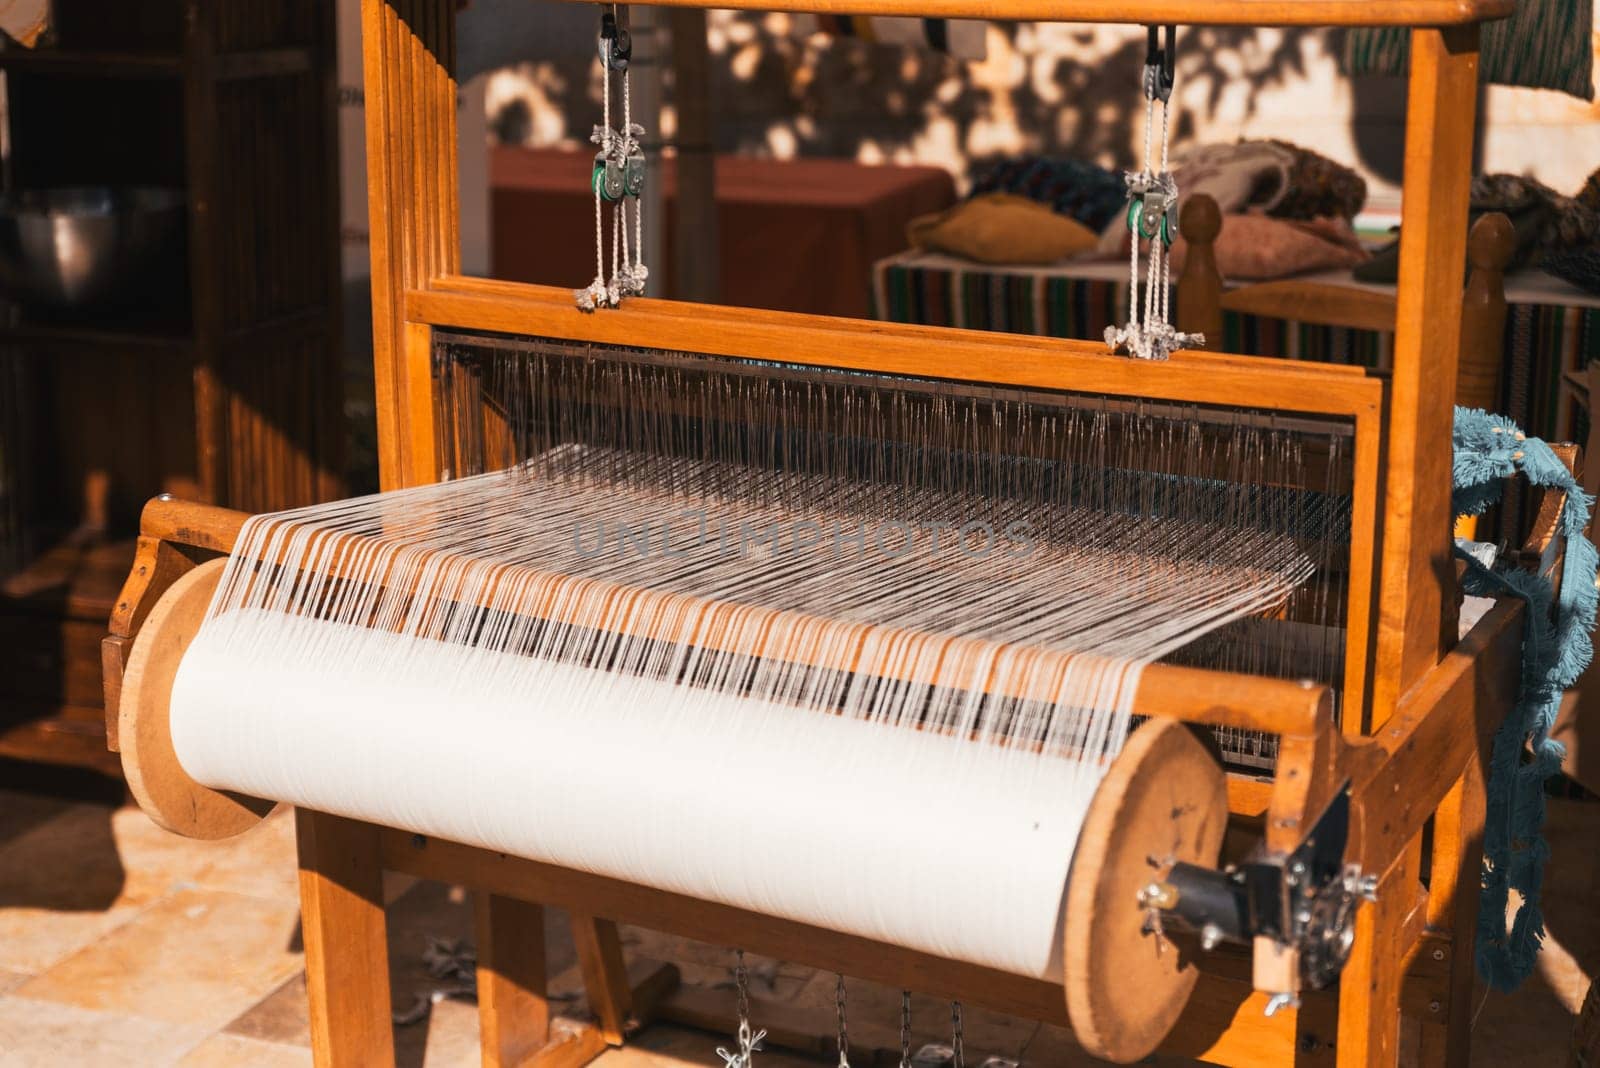 Master weaver is weaving the tapestry with diverse bright threads, close up. Artisanal at work.